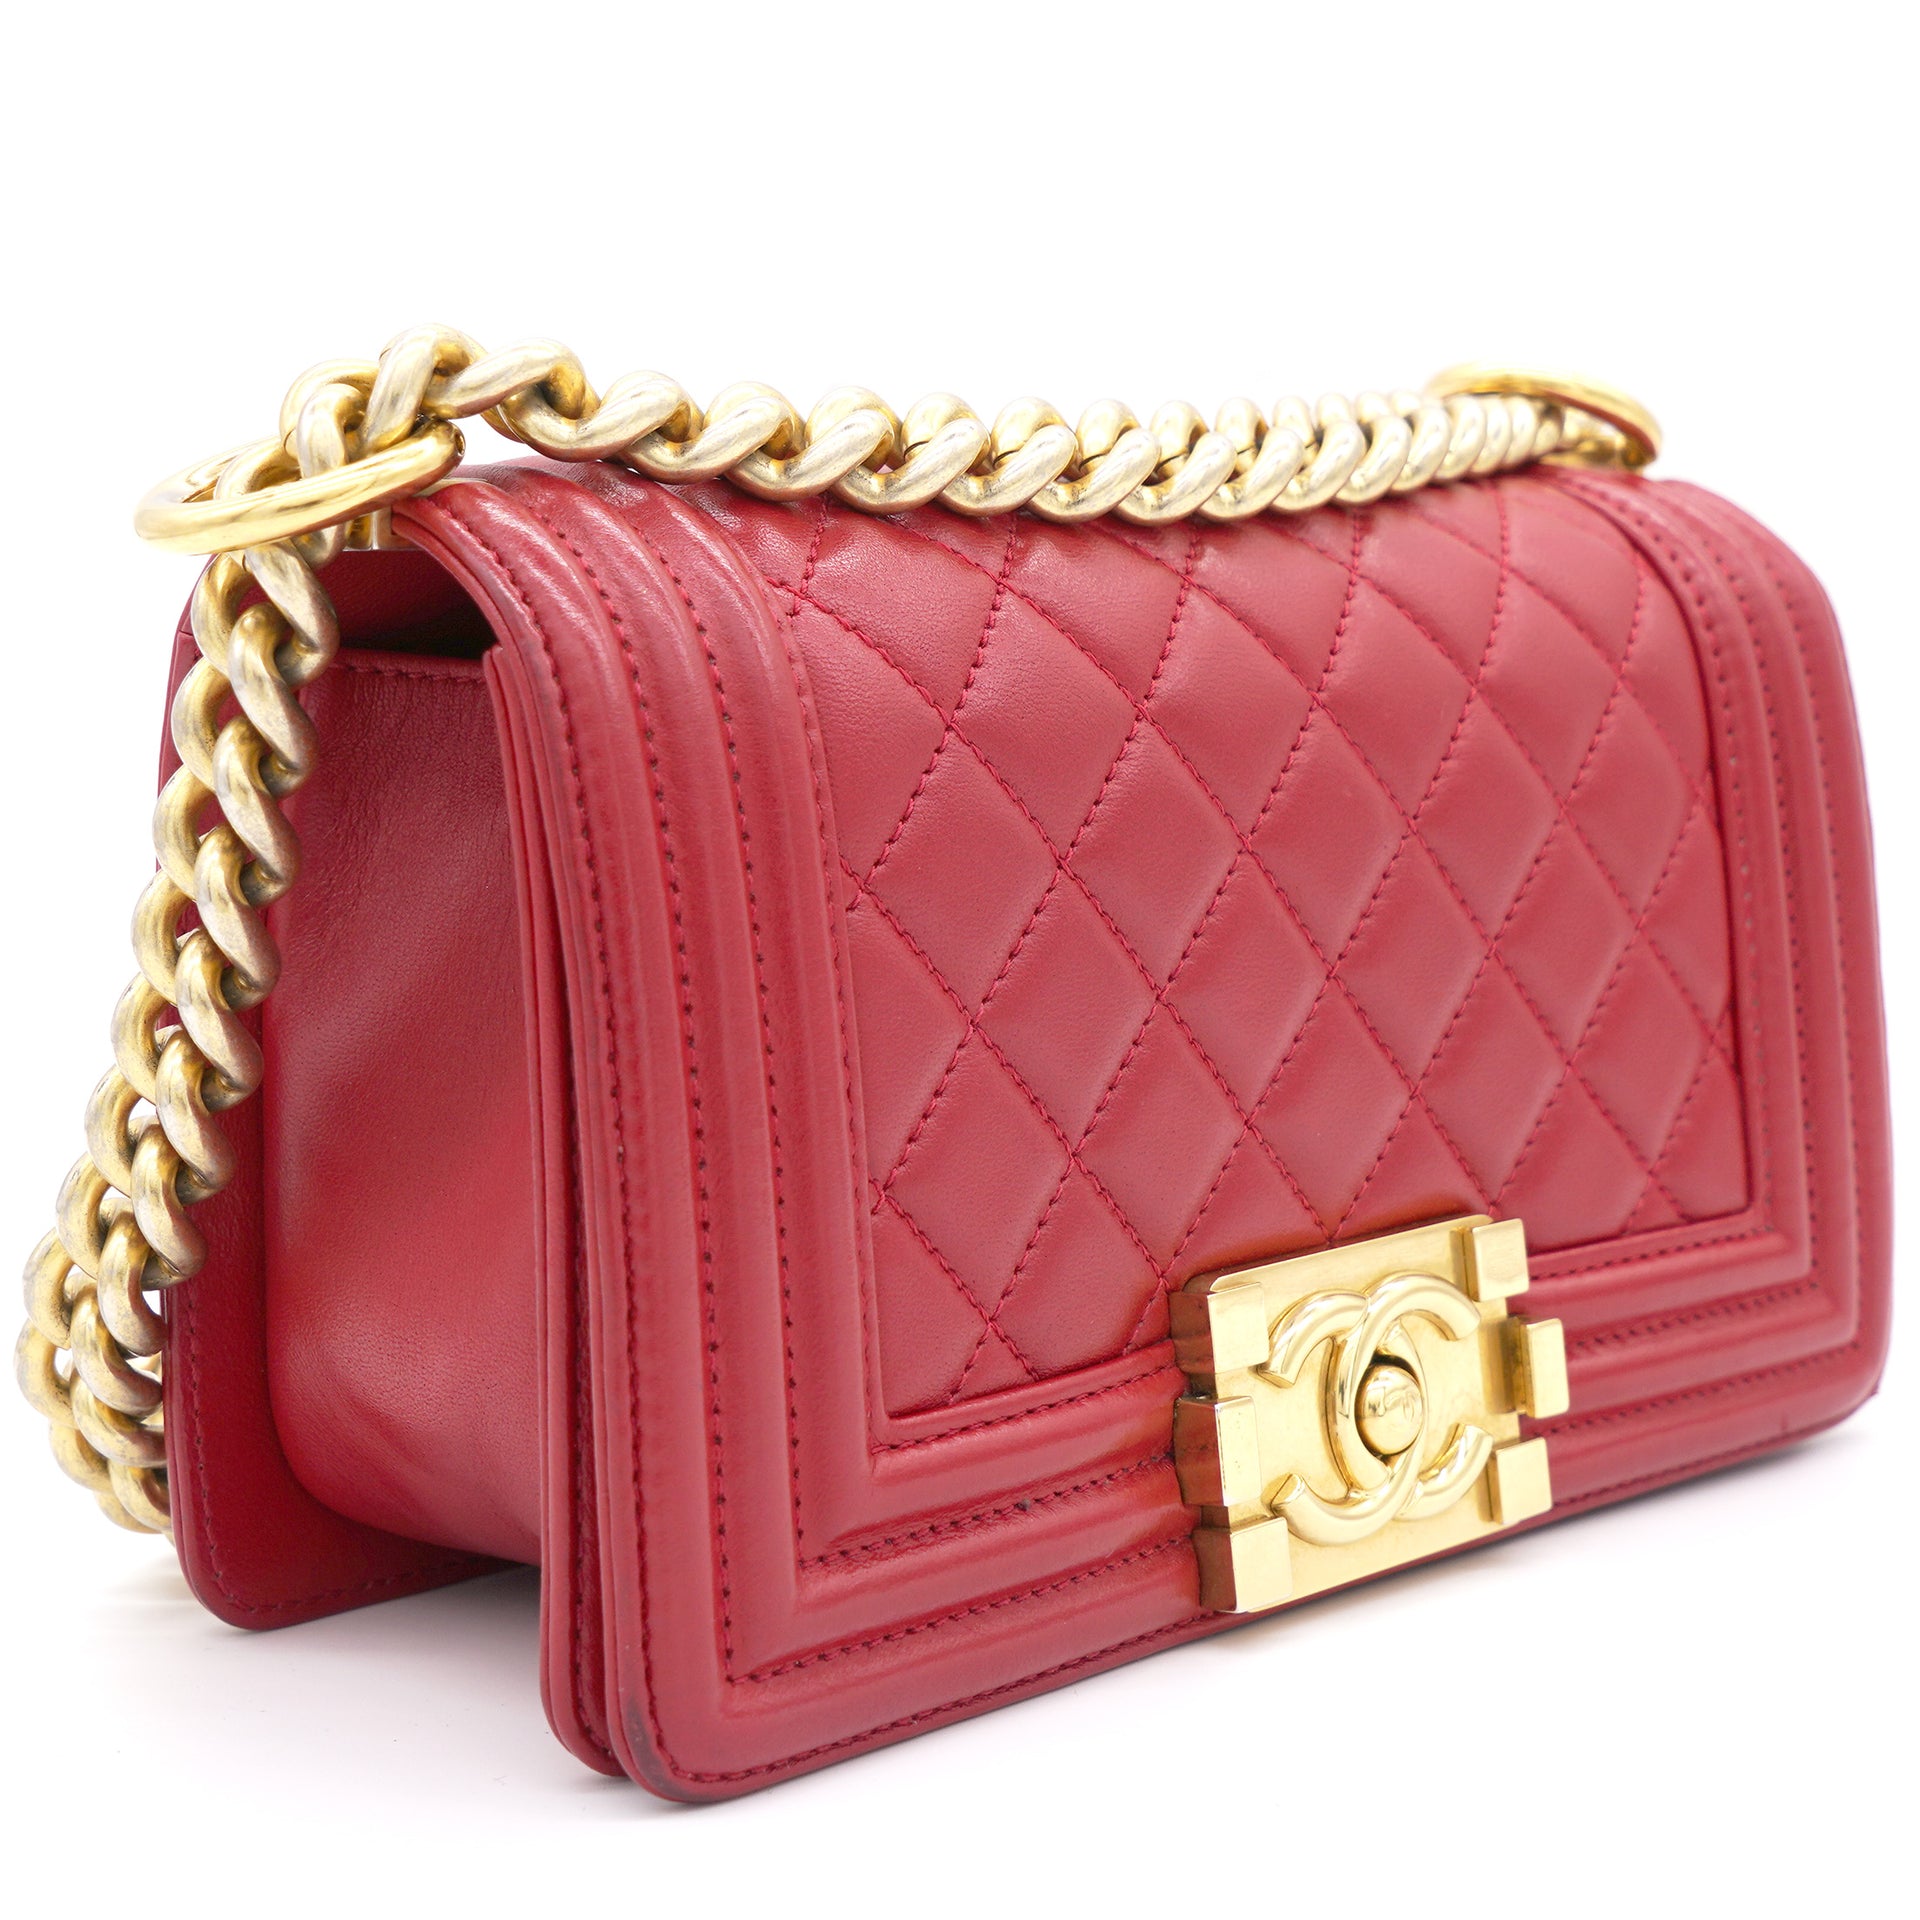 Chanel Red Quilted Lambskin Medium Classic Double Flap Bag  myGemma  Item  120352